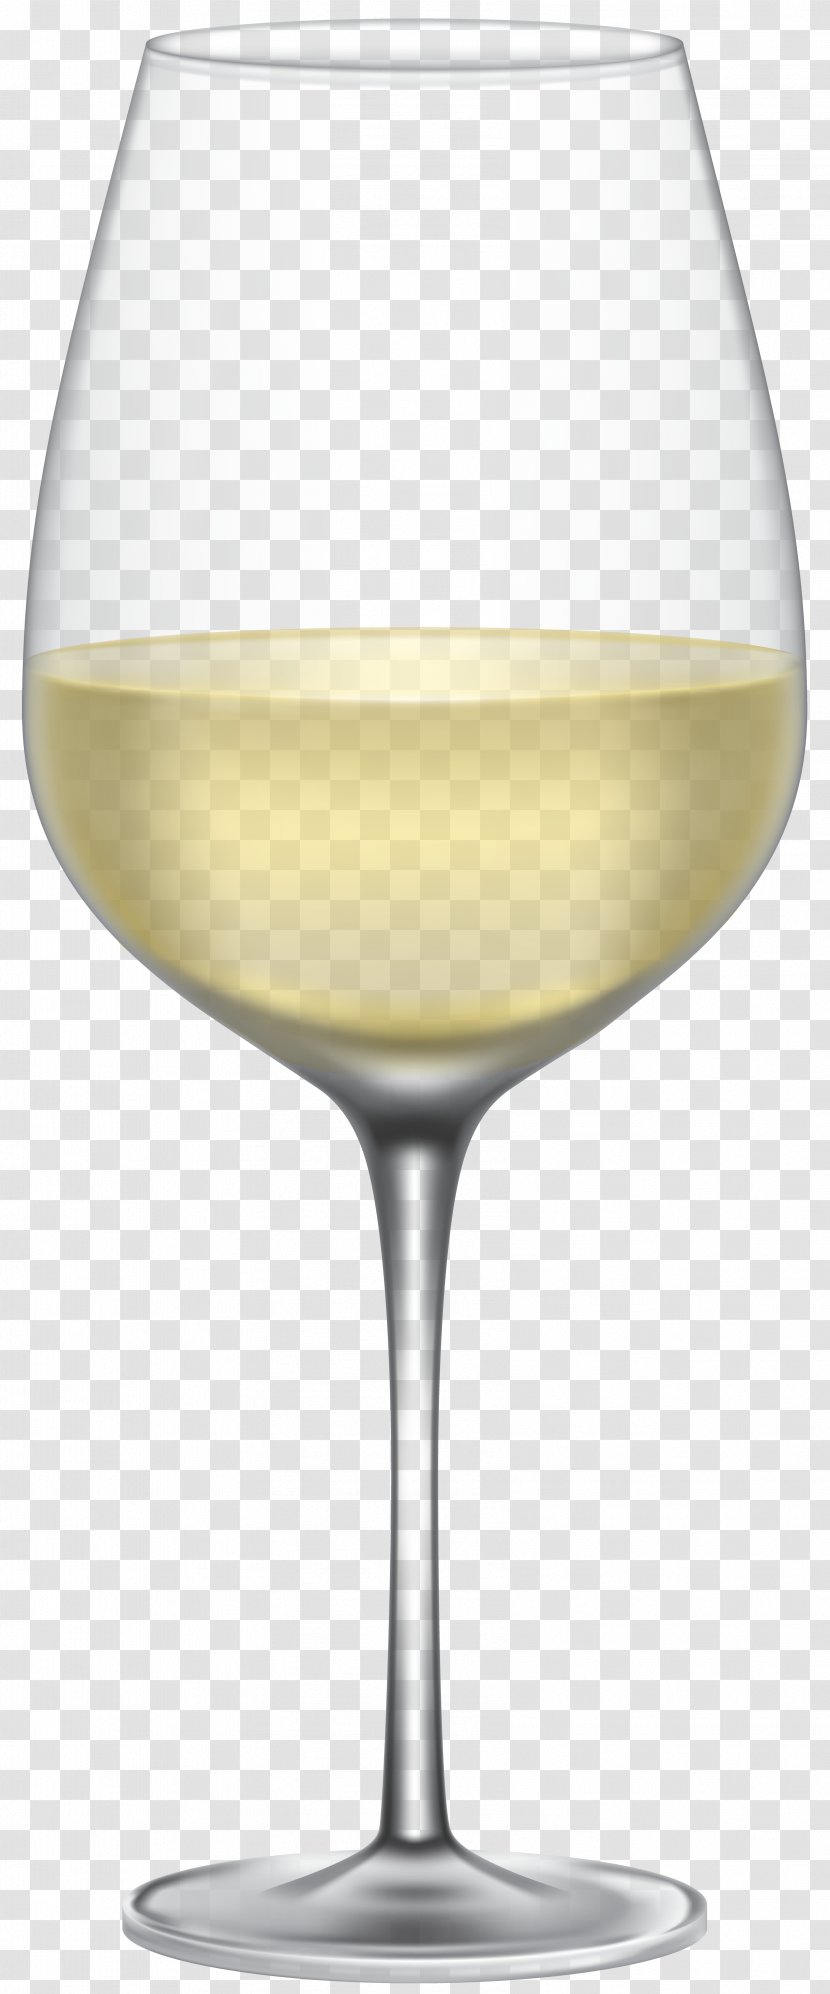 Wine Glass Champagne White - Wineglass Transparent PNG